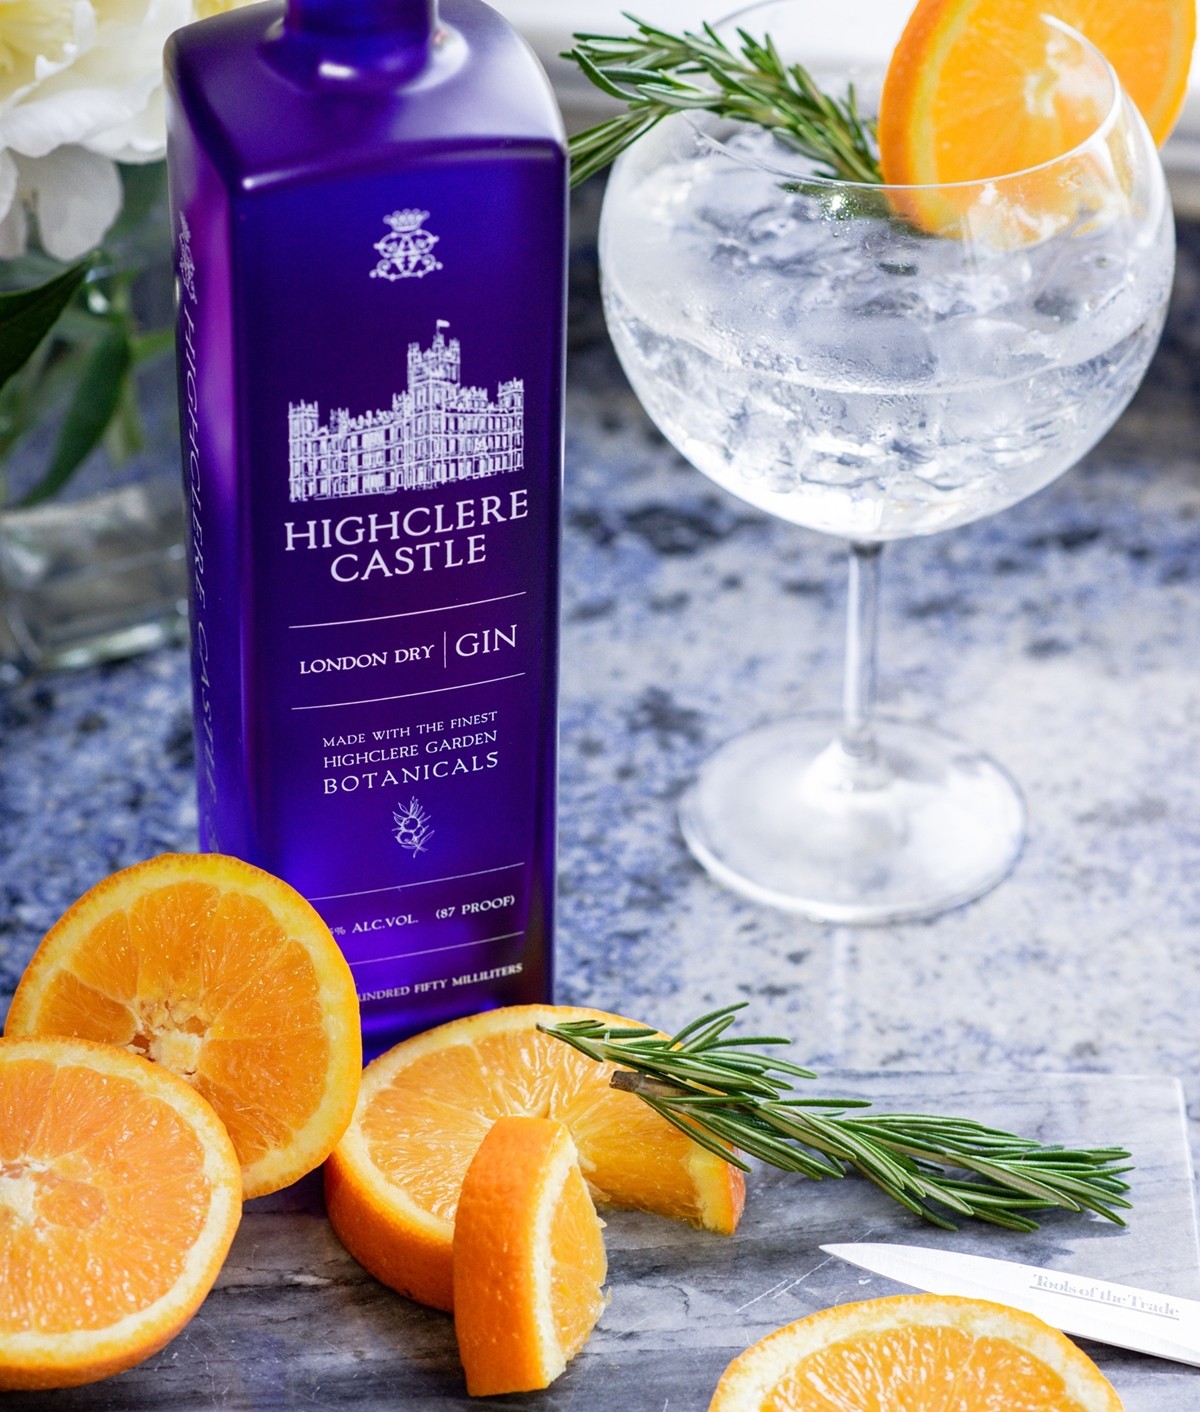  Gin & Tonic “The Highclere G&T”